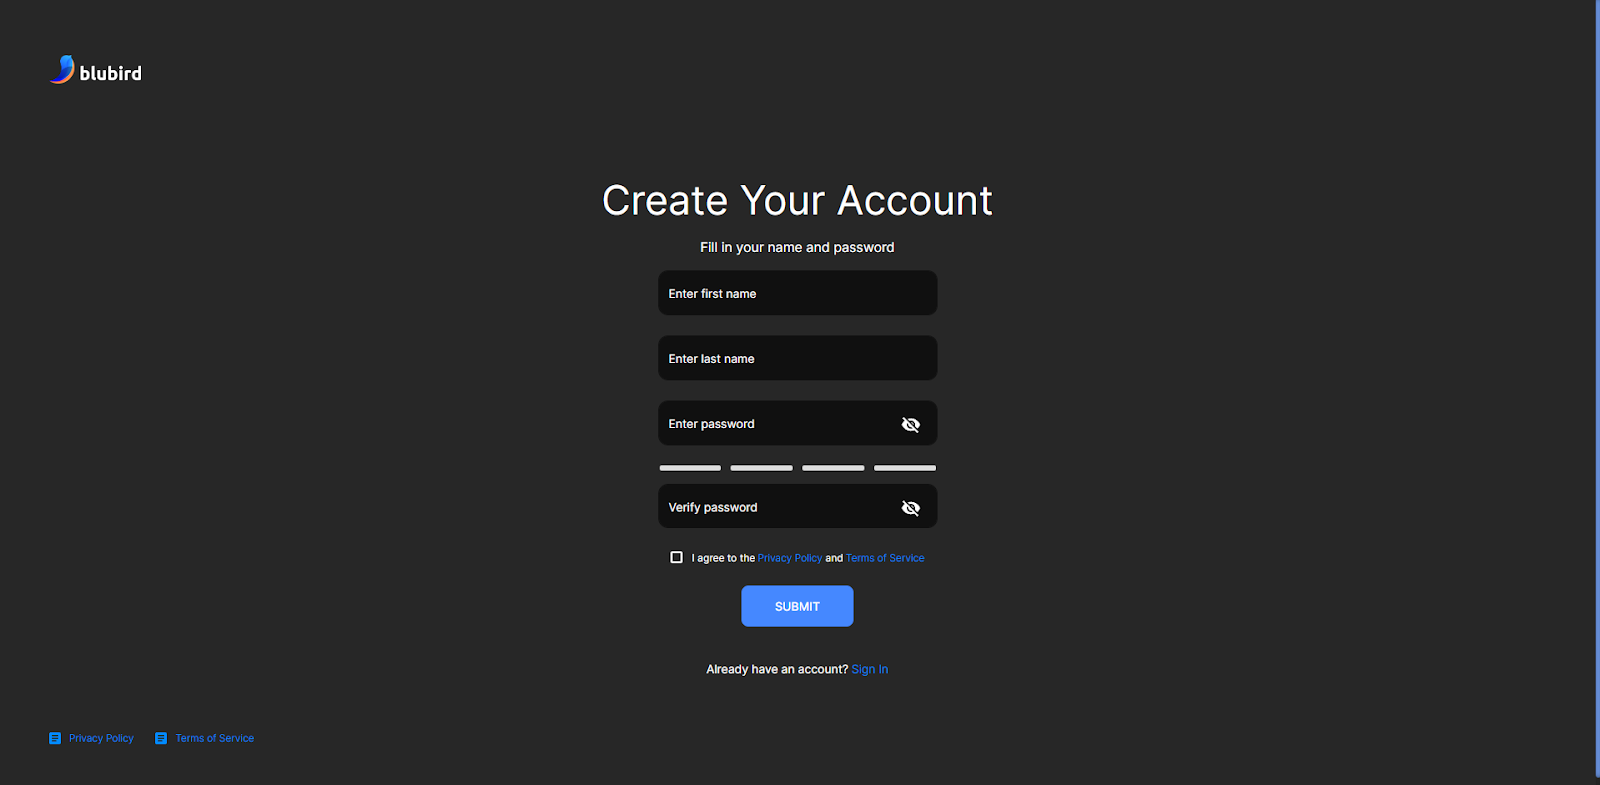 Investor Portal Create Your Account Name and Password